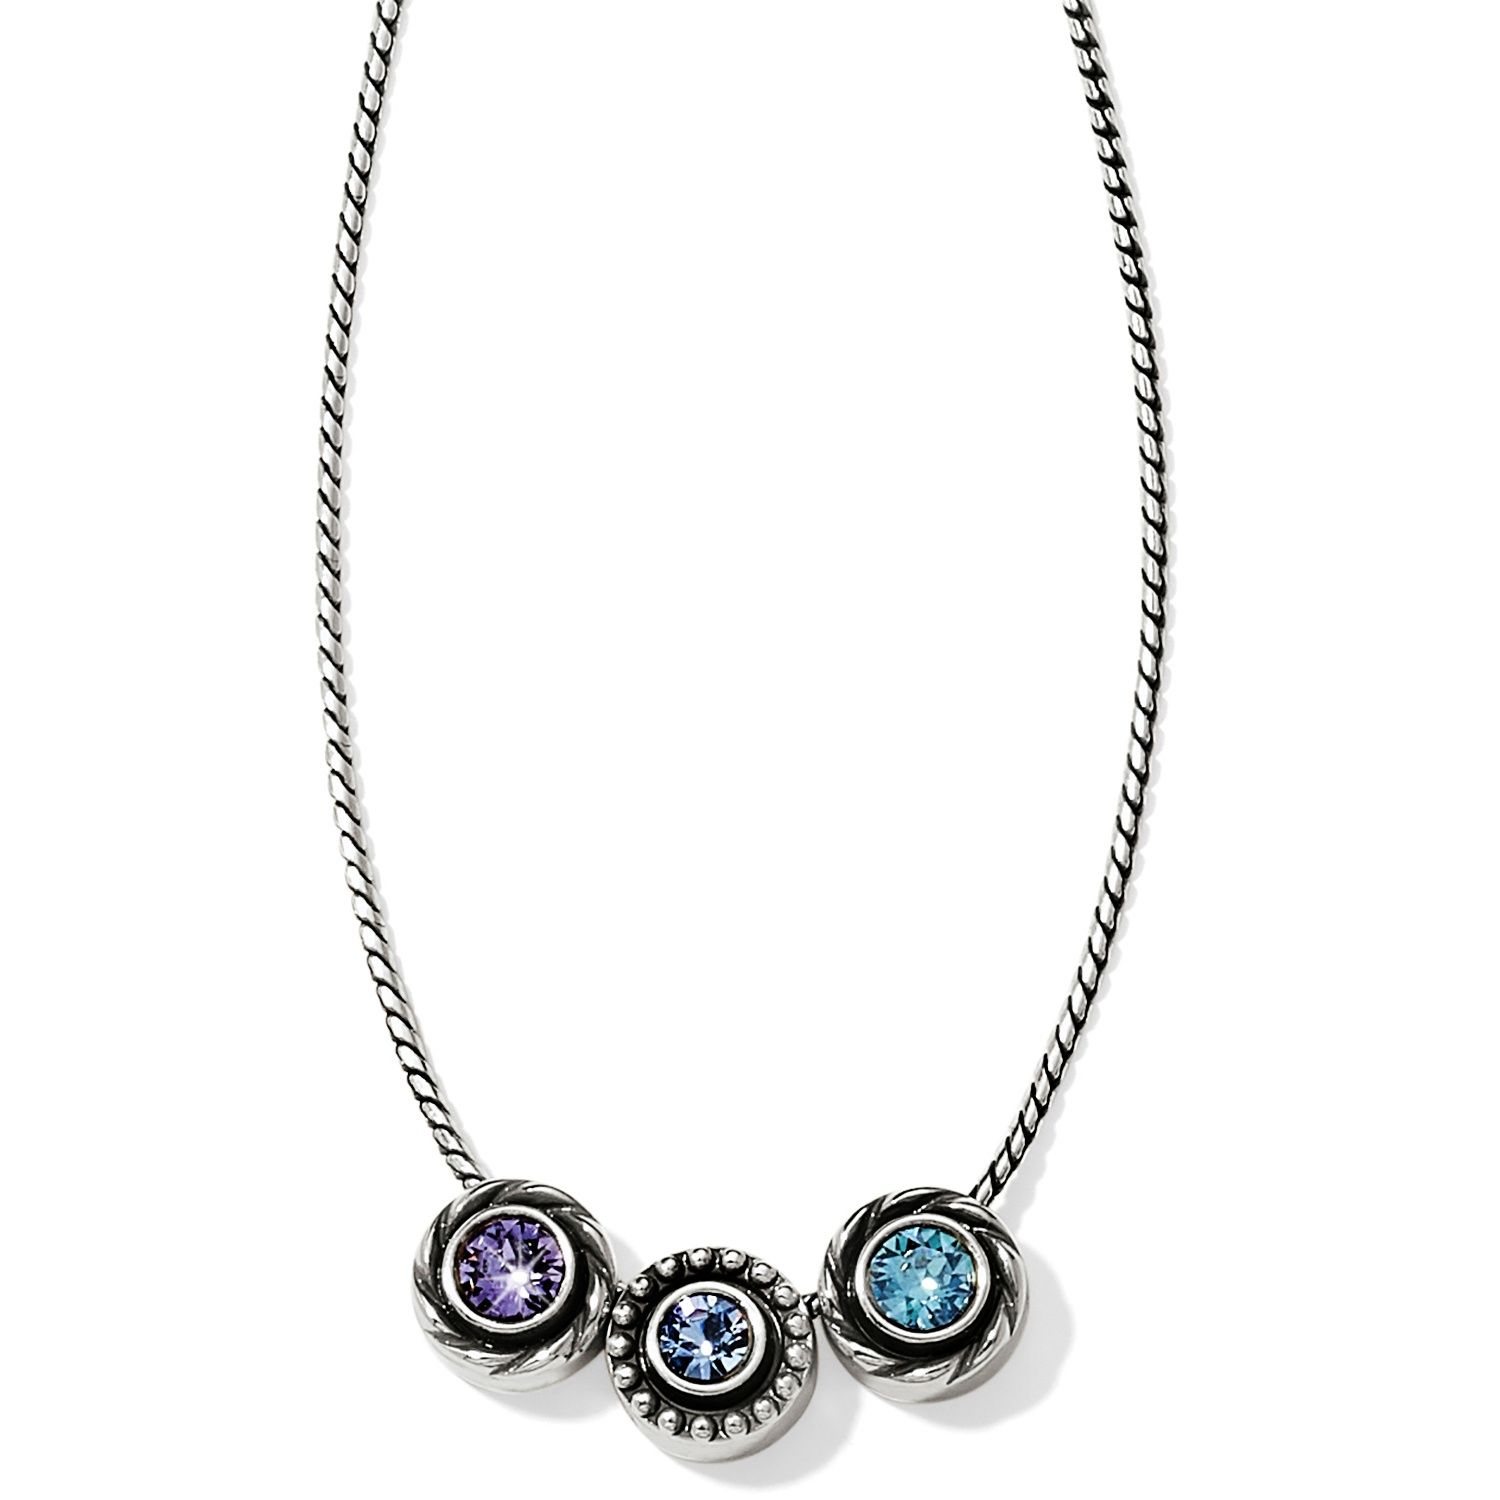 Halo Orion Necklace Pertaining To 2020 Oval Sparkle Halo Pendant Necklaces (View 20 of 25)